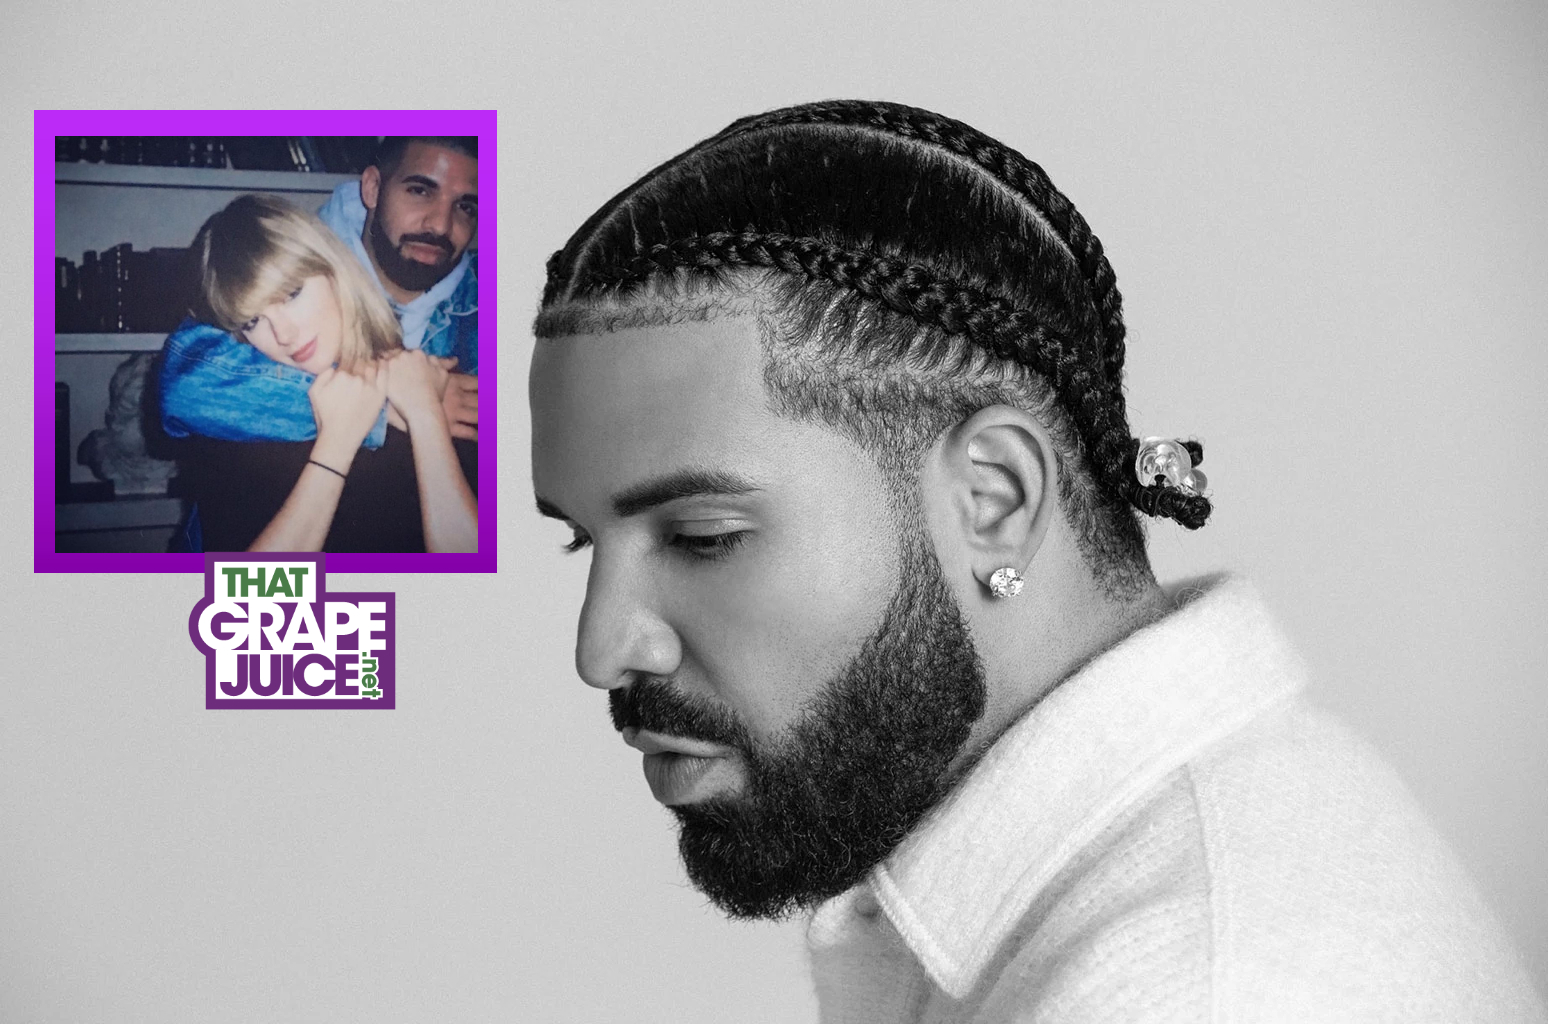 Drake and 21 Savage Bump Taylor Swift From the Top - The New York